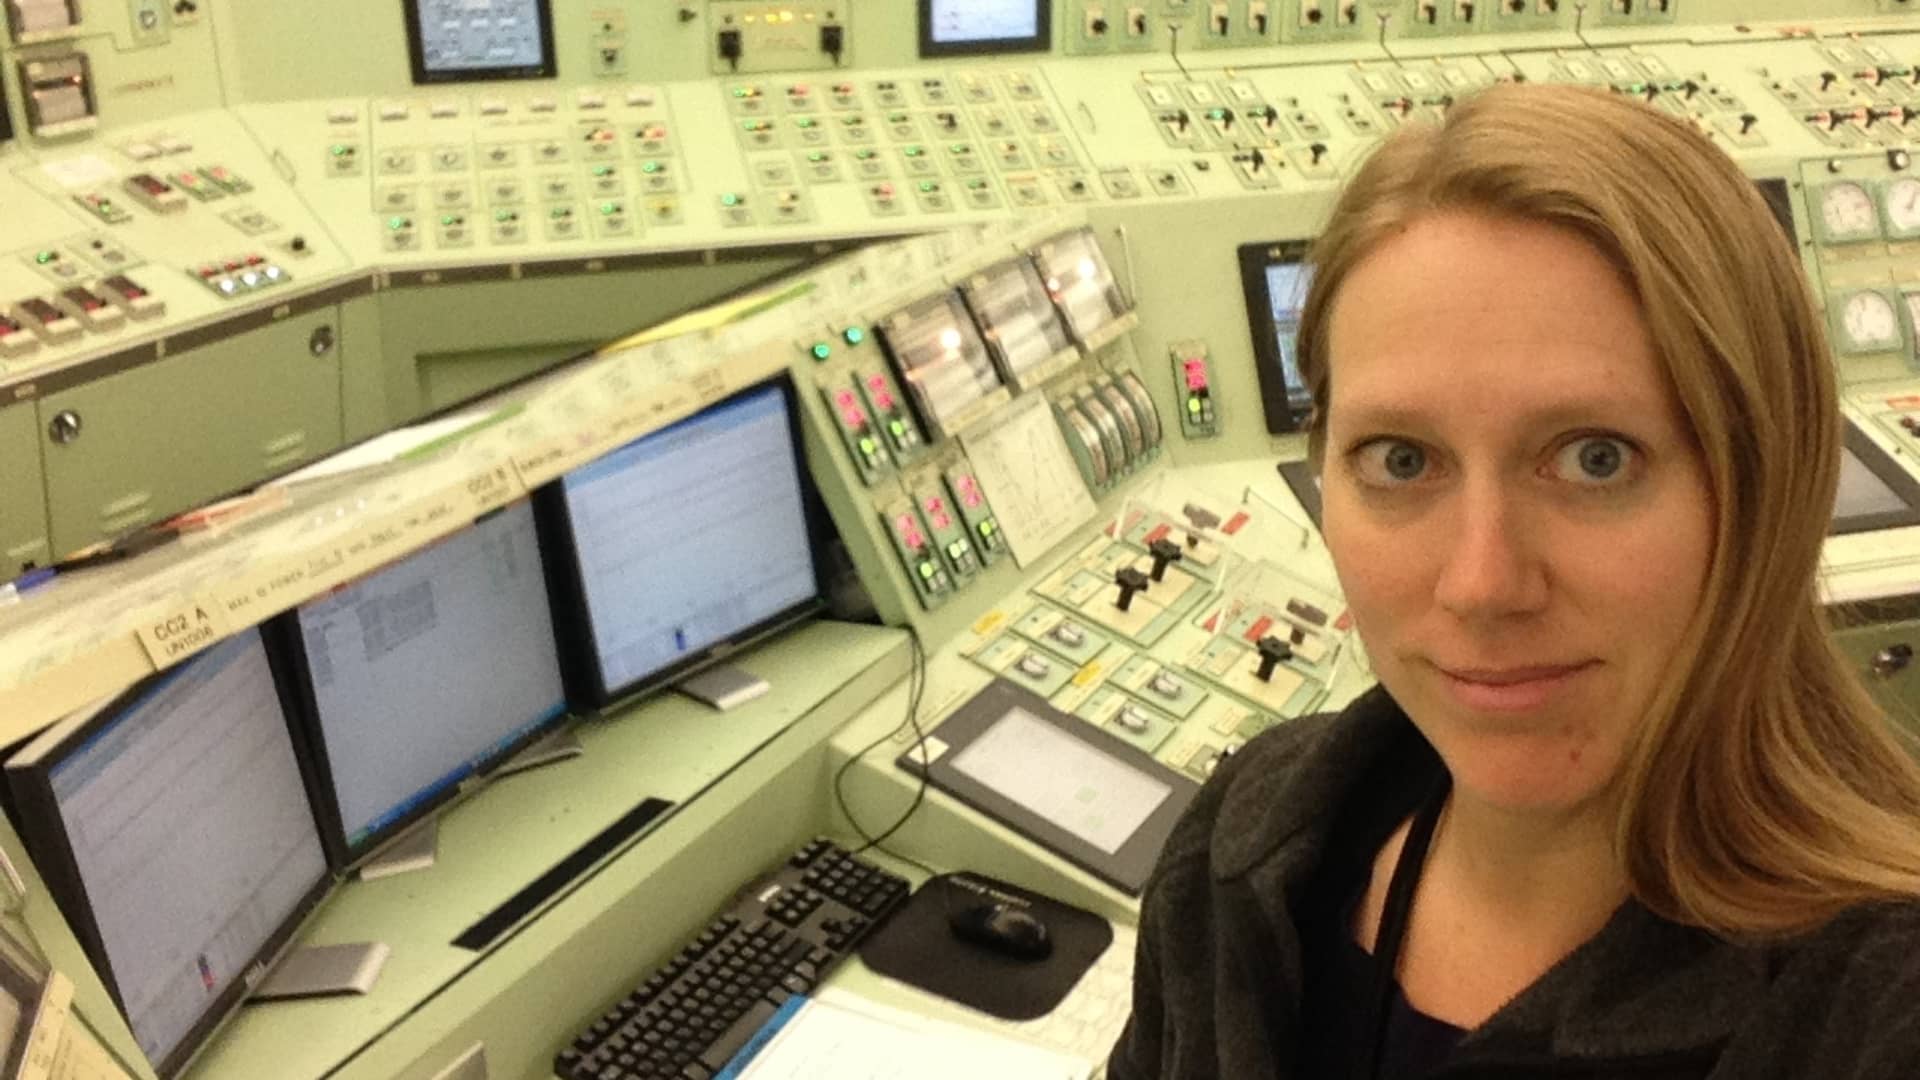 The Diablo Canyon control room turned this mom into a nuclear advocate ...